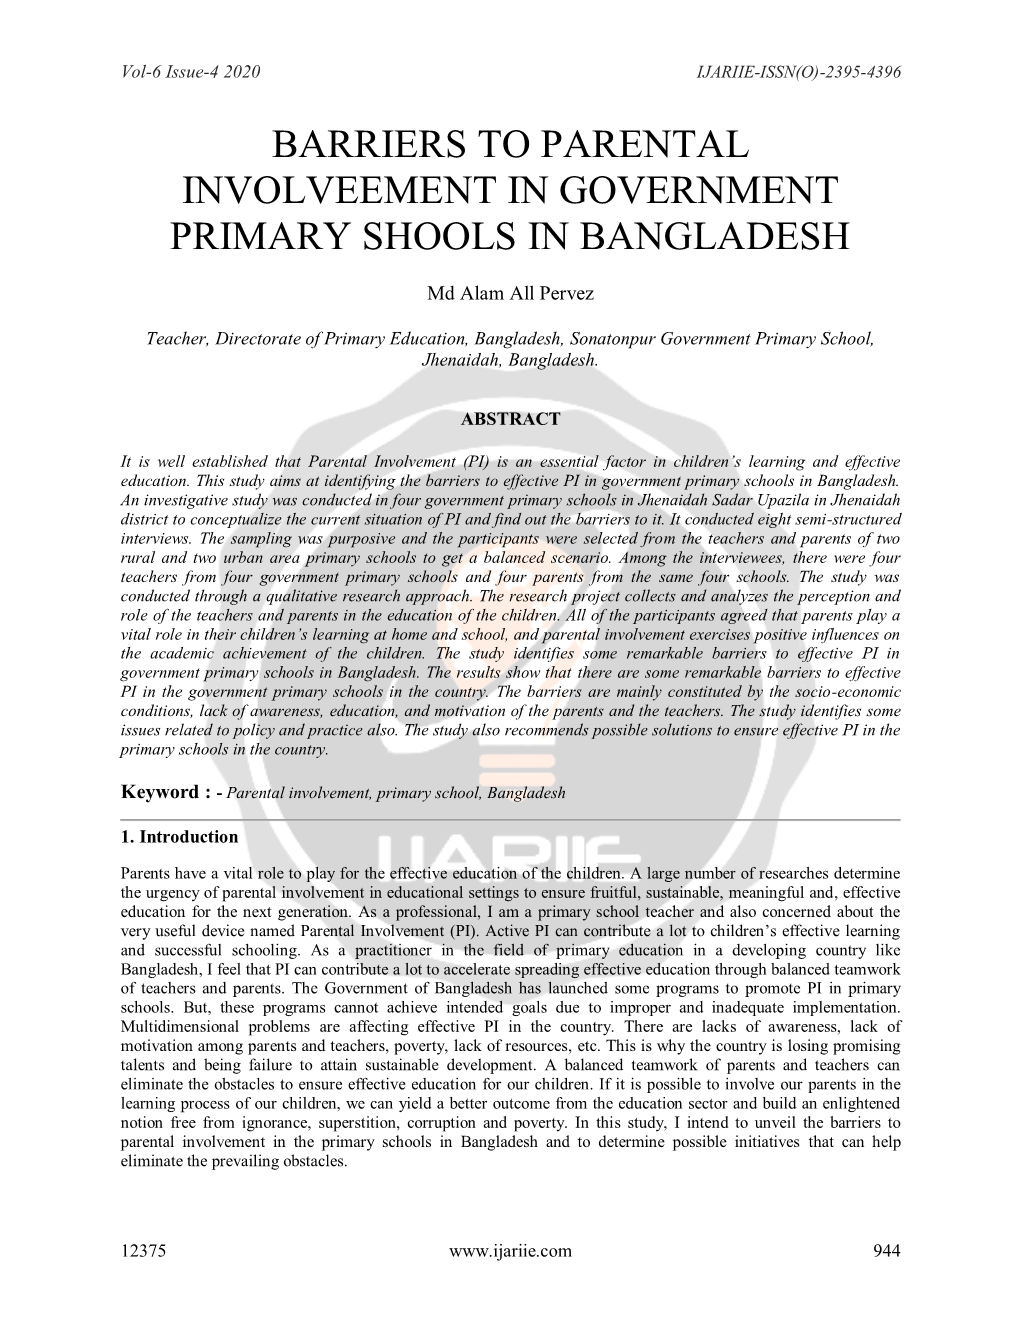 Barriers to Parental Involveement in Government Primary Shools in Bangladesh